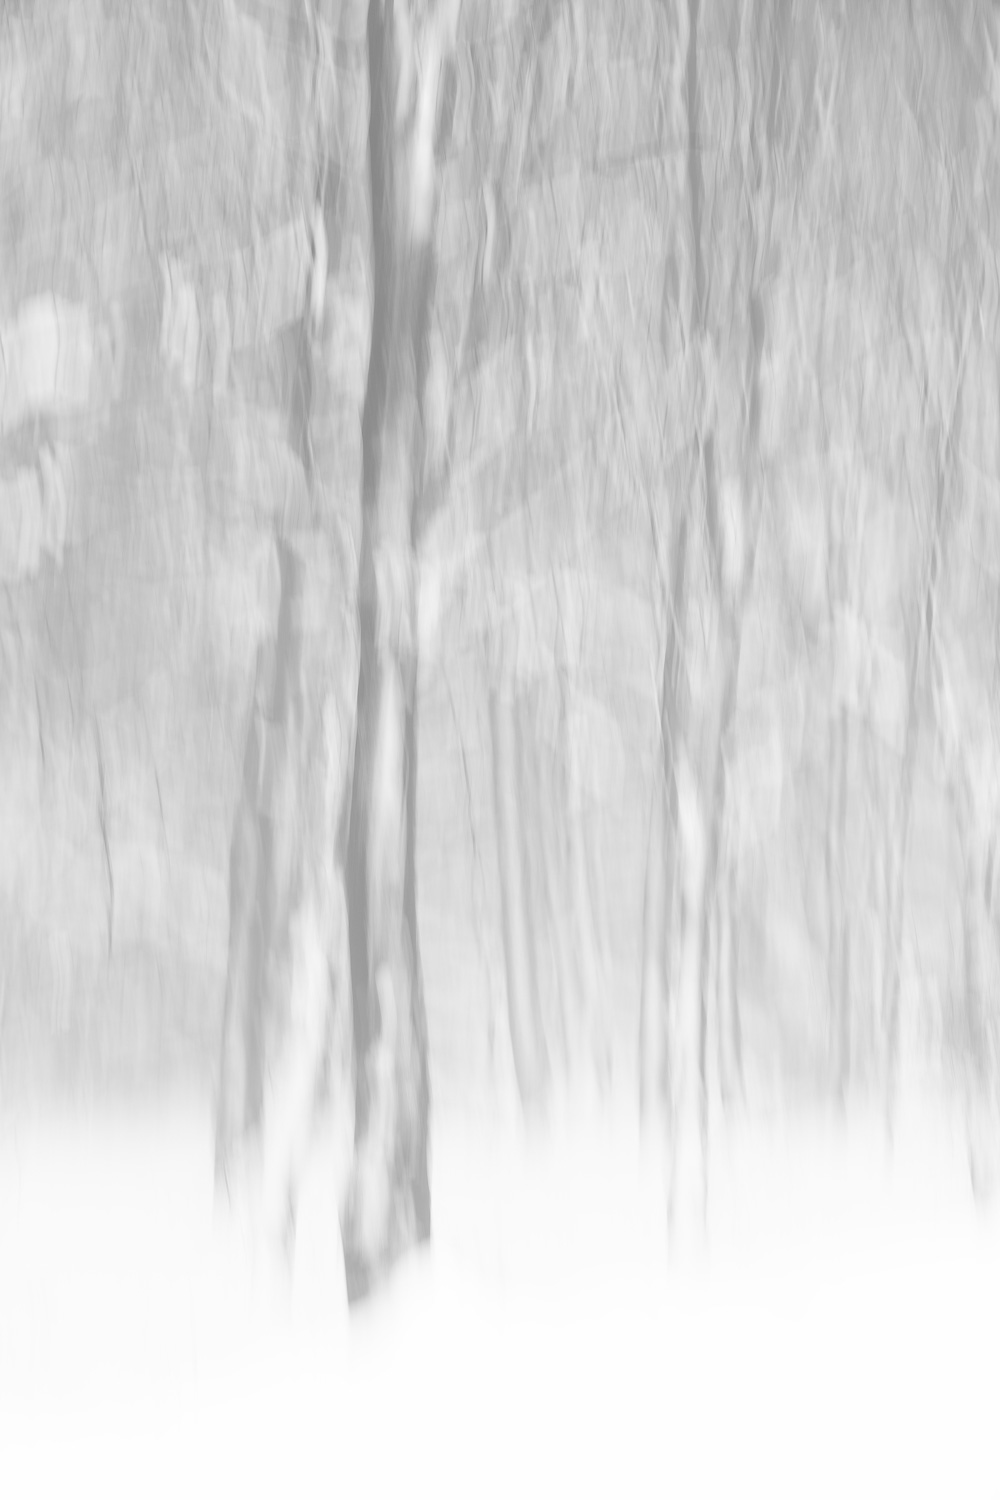 Moving moment in snow by Karen Ketels